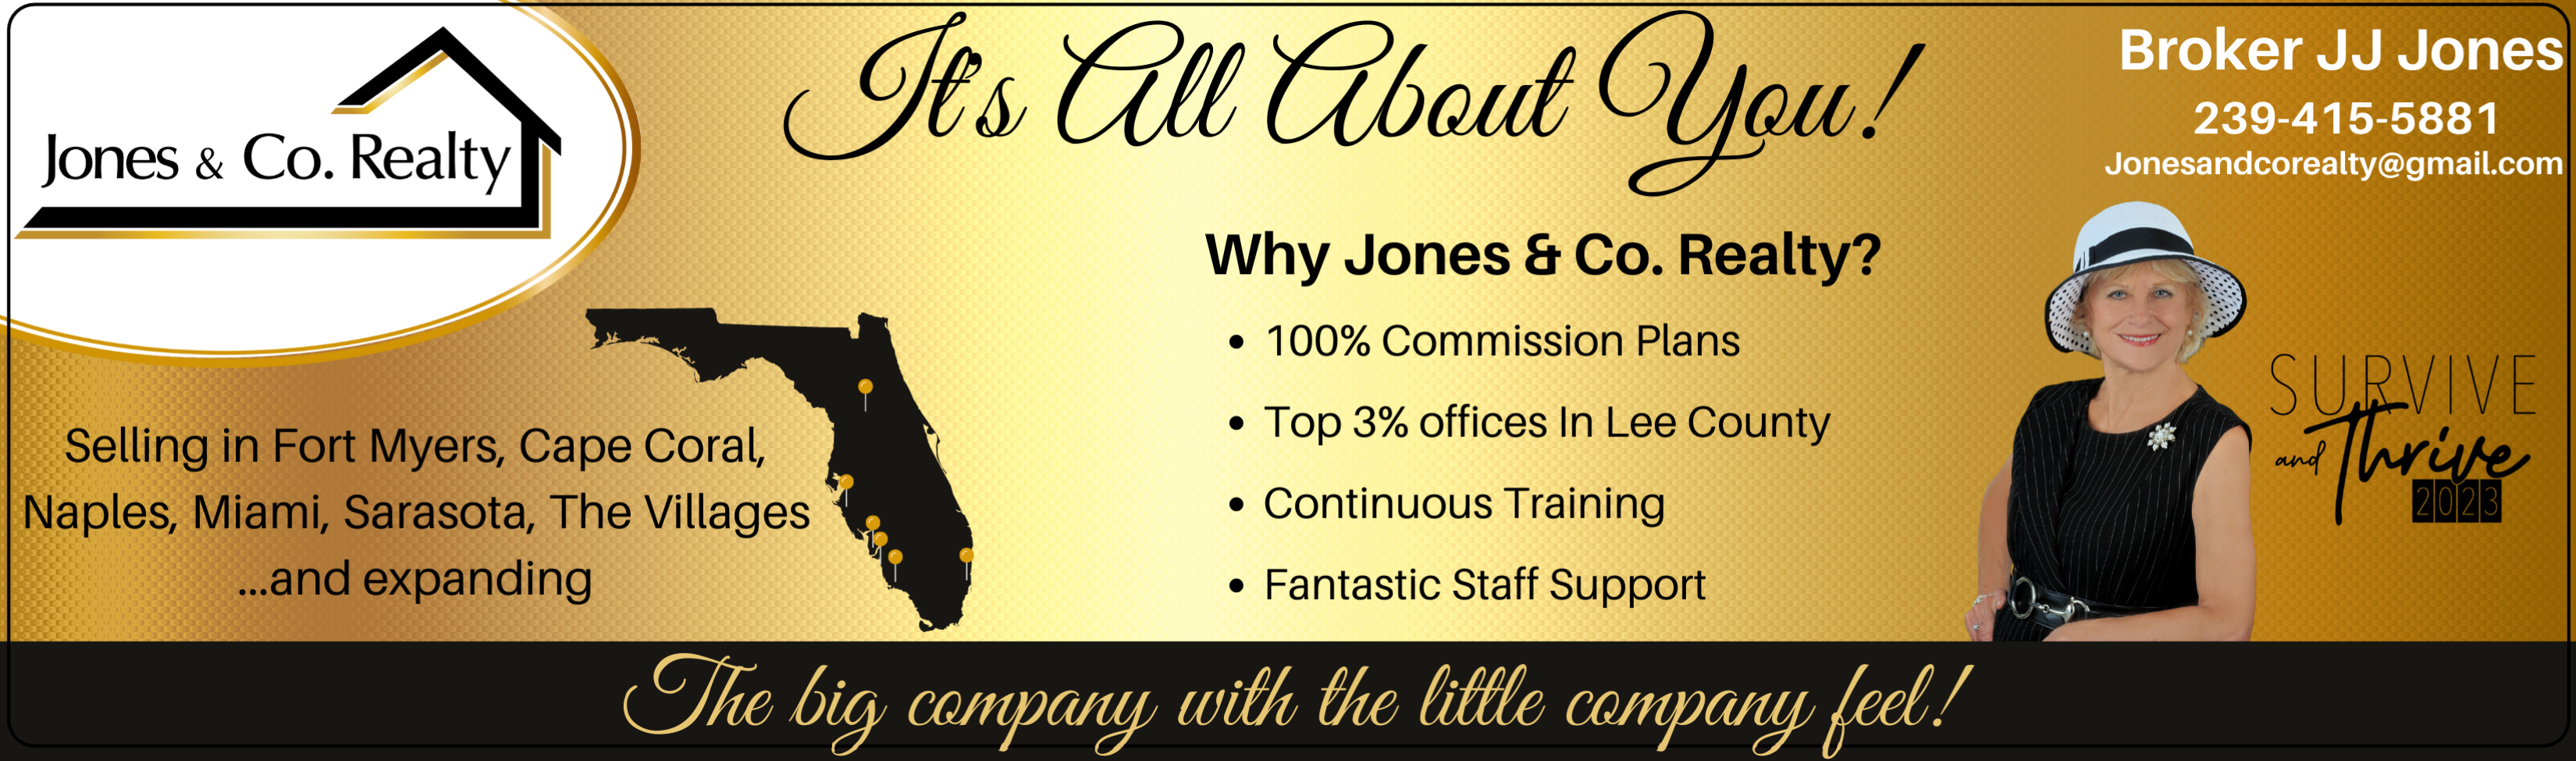 Jones and Co Realty